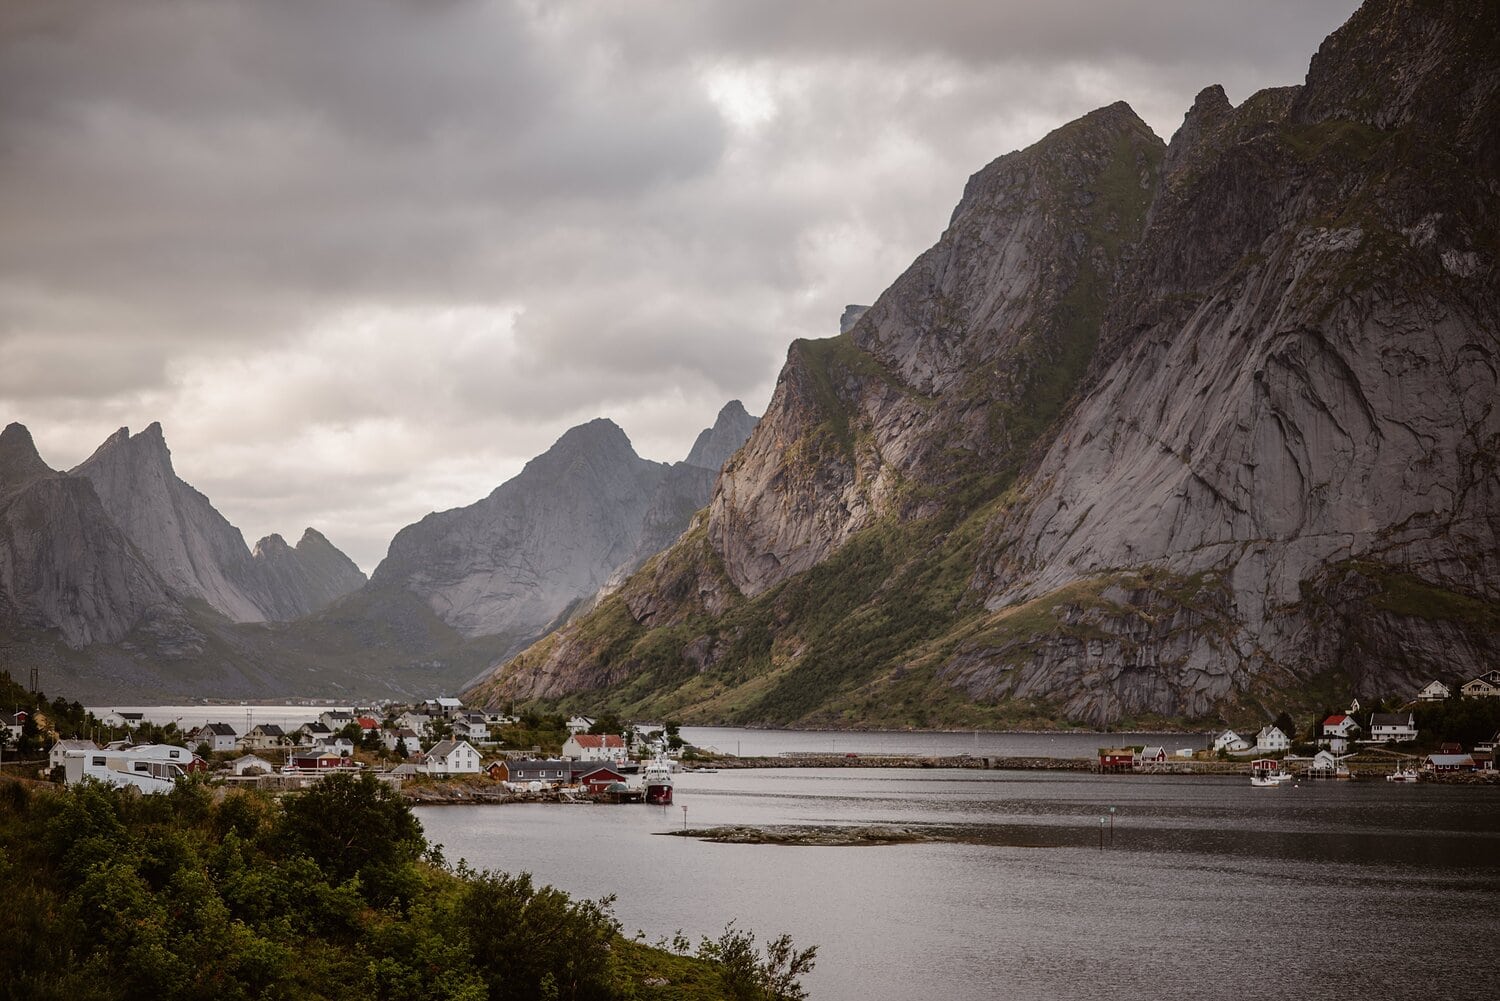 Landscape of the mountains and water at the Lofoten Islands in Norway.